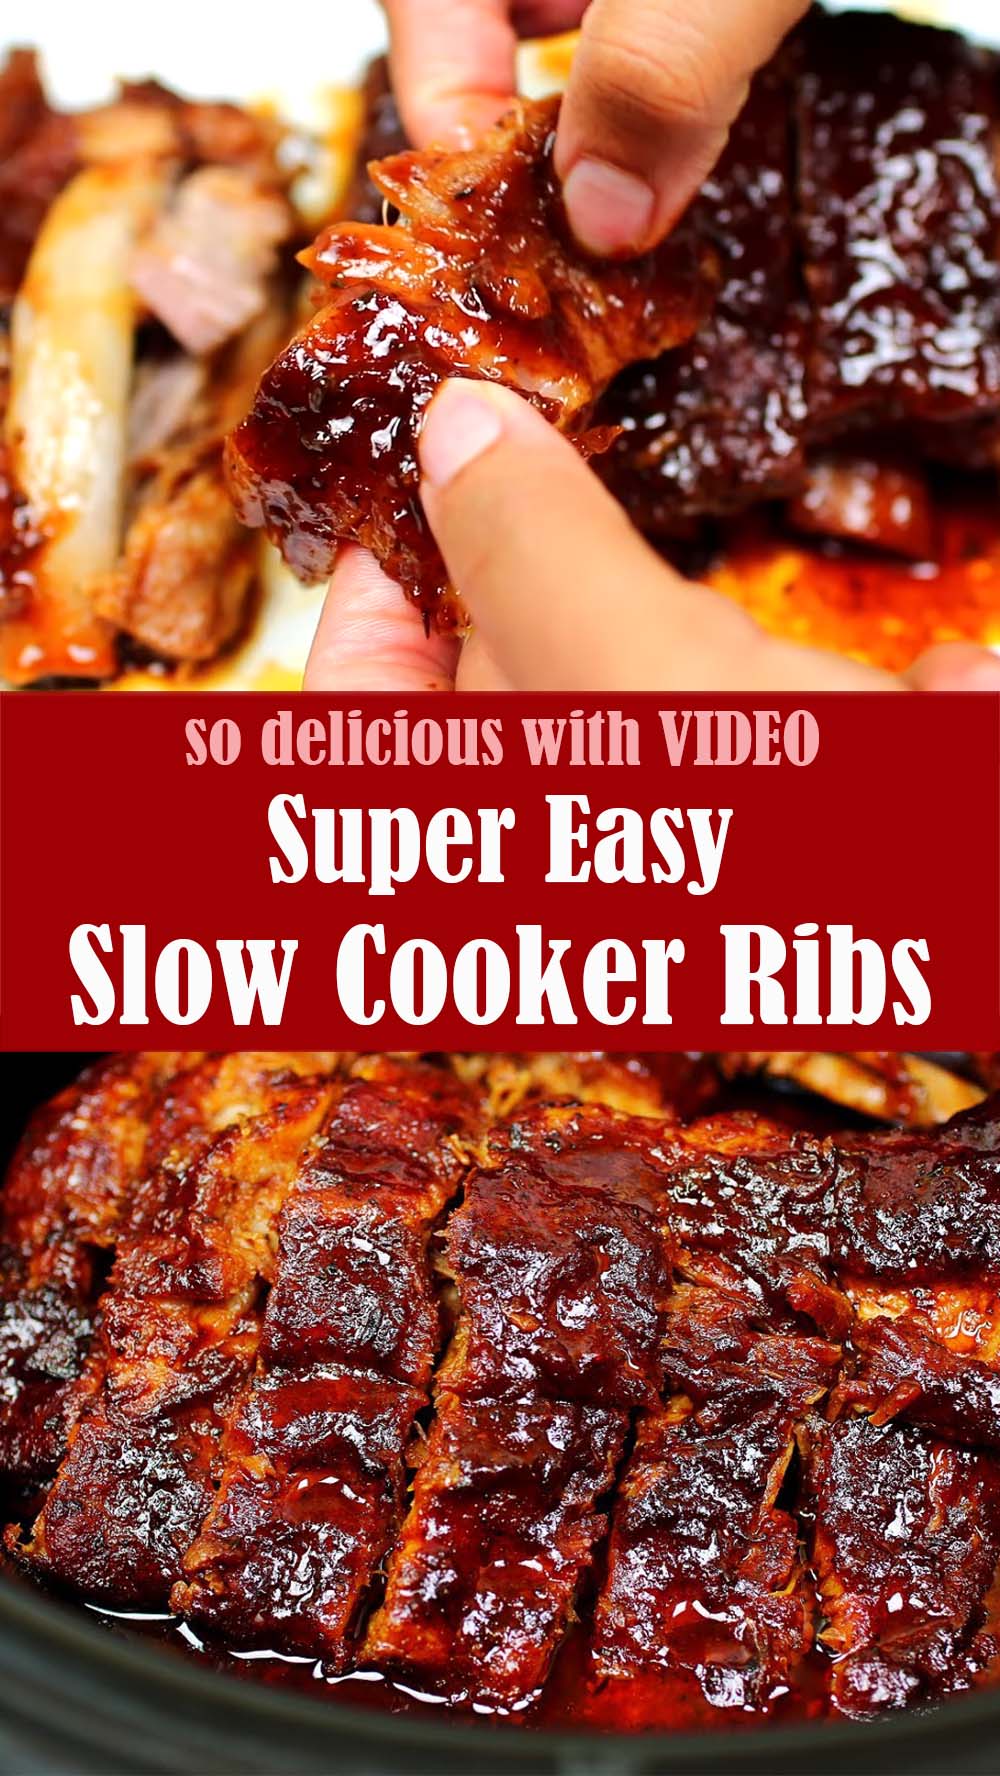 Super Easy Slow Cooker Ribs Recipe with VIDEO – Reserveamana